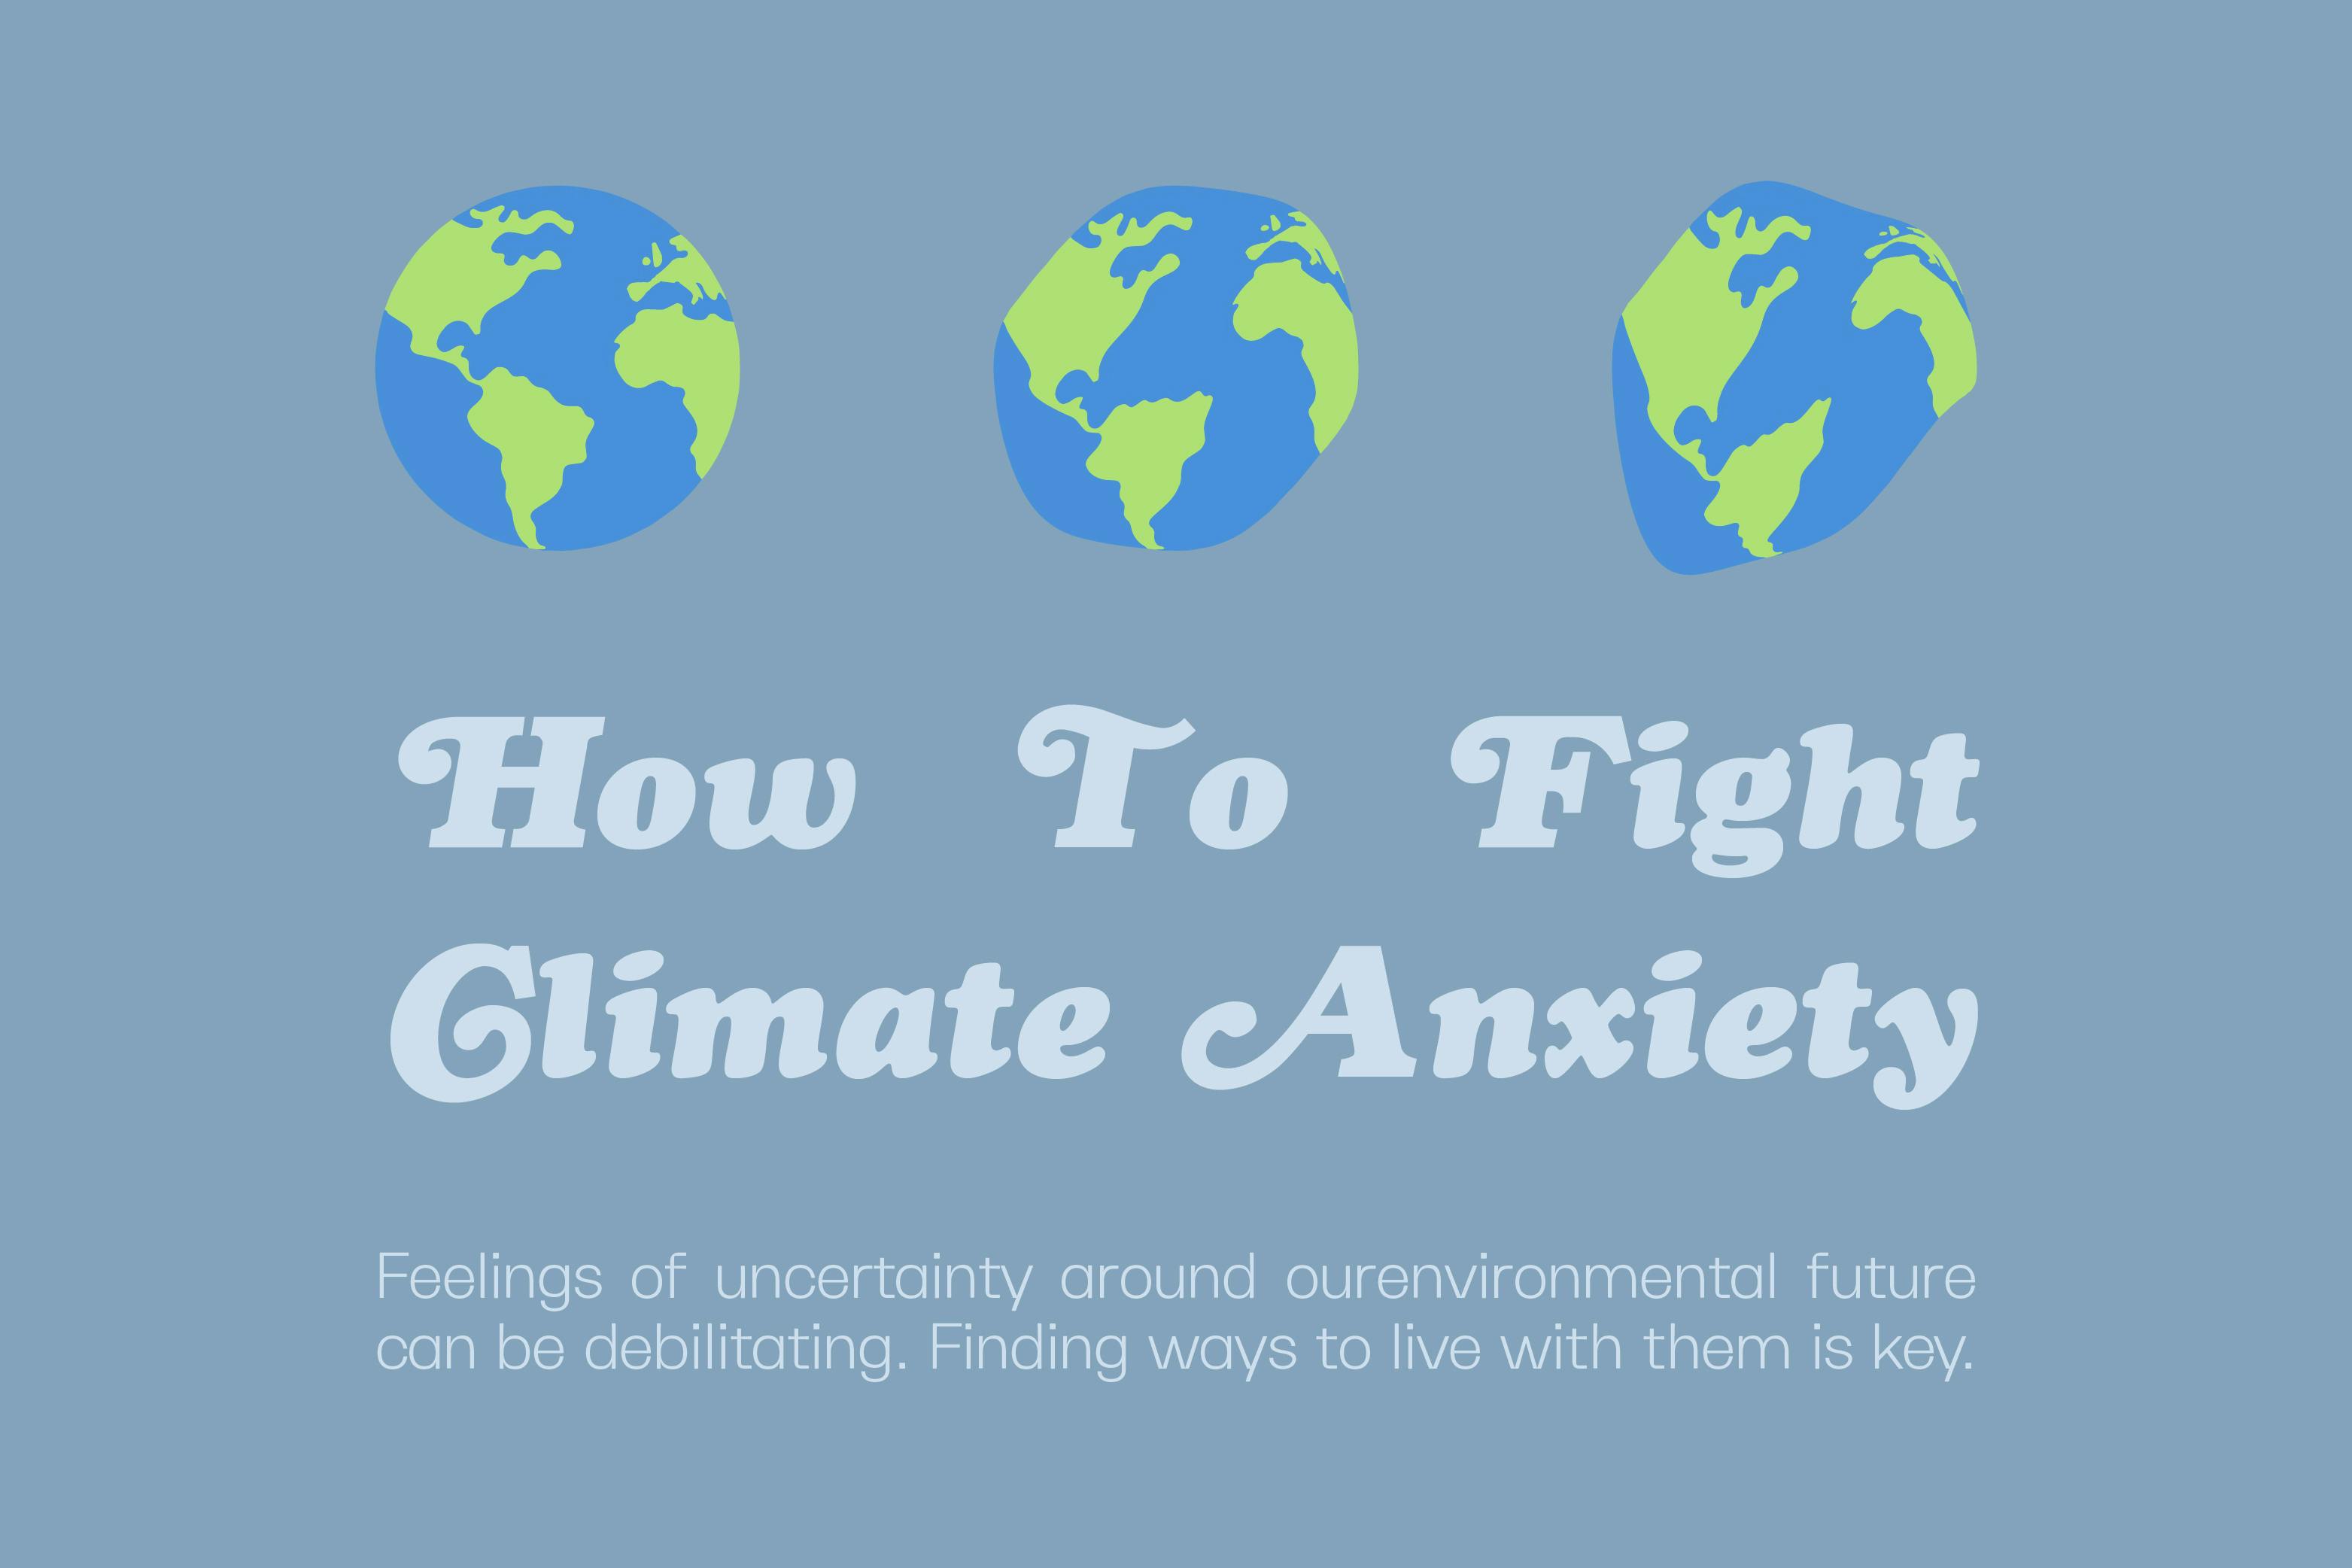 How To Fight Climate Anxiety